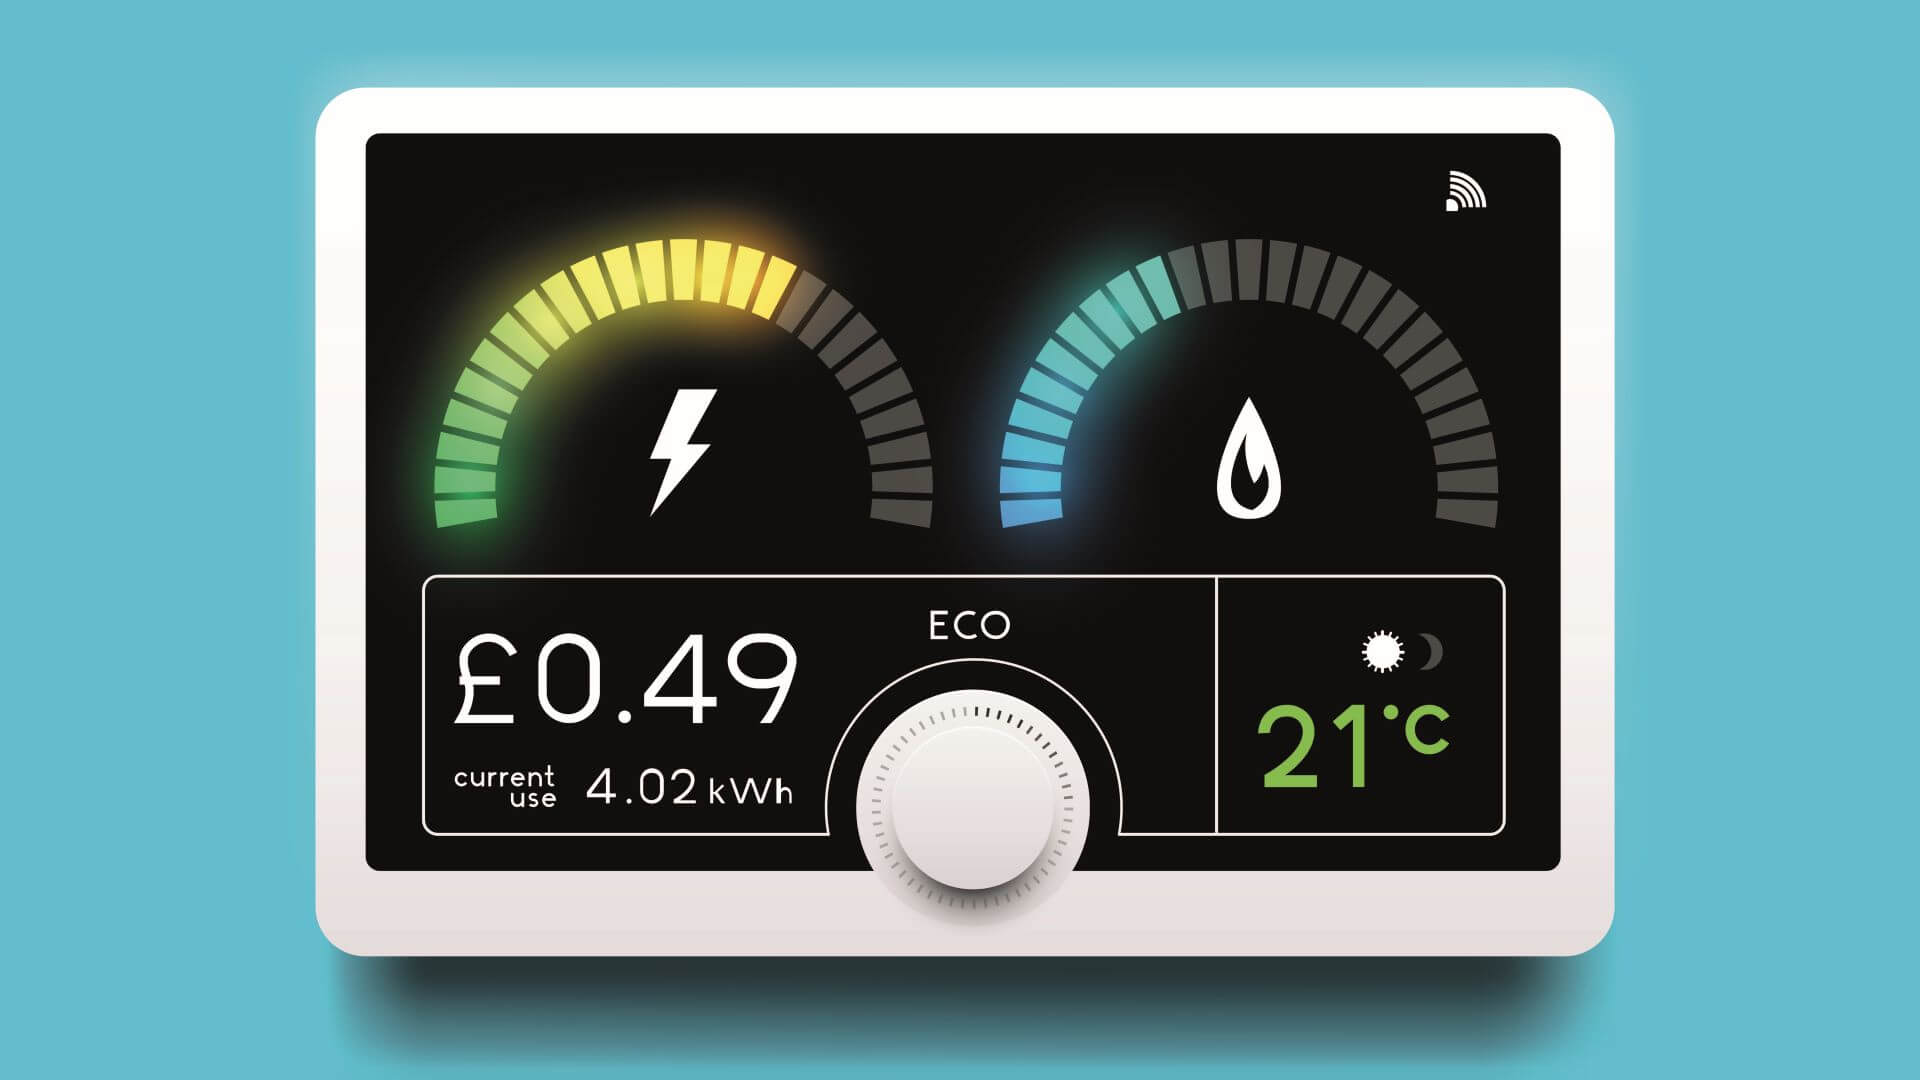 Picture of a smart meter showing both gas and electricity usage